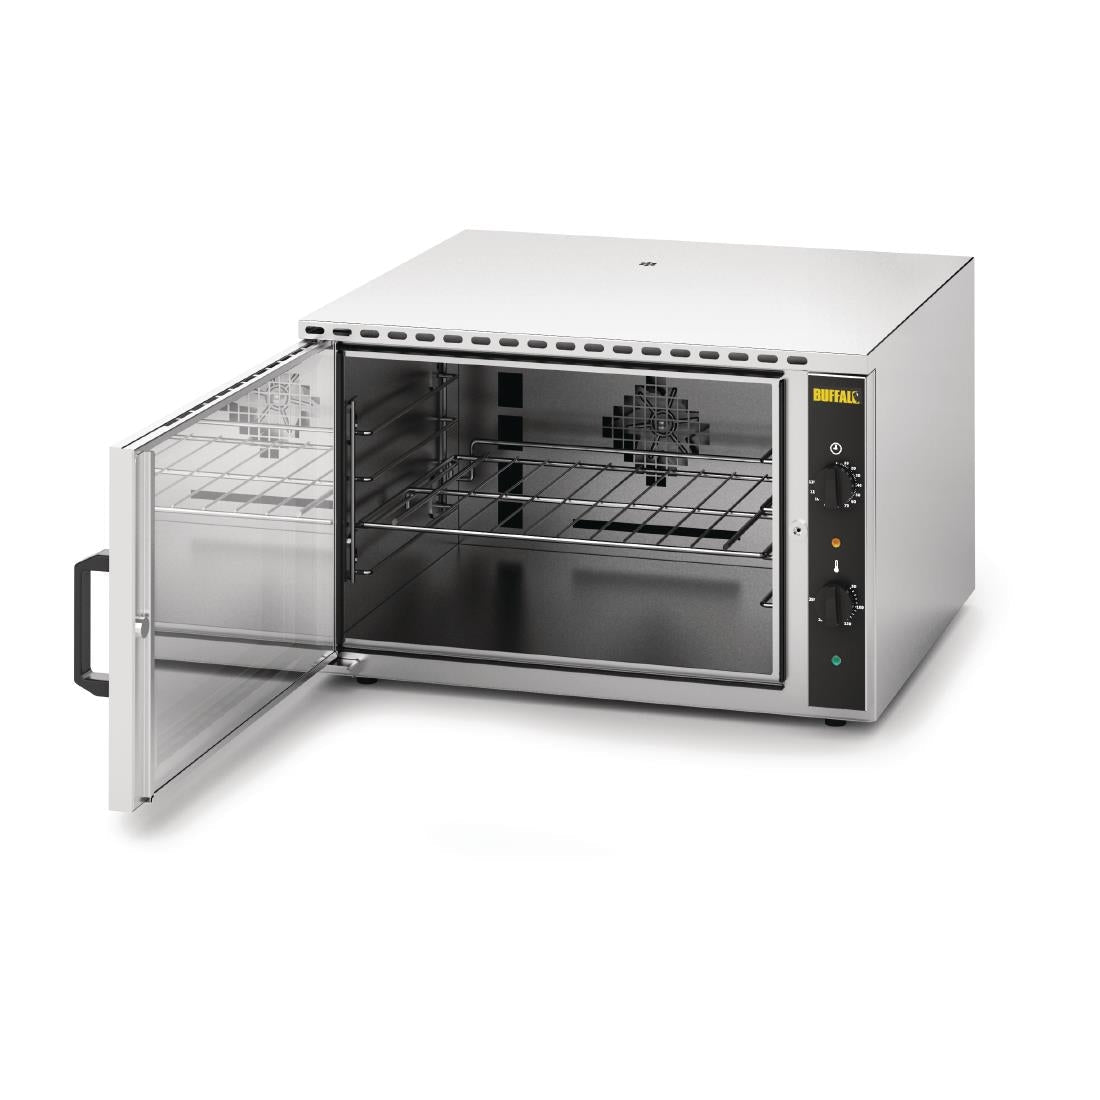 CW863 Buffalo Convection Oven 50Ltr JD Catering Equipment Solutions Ltd